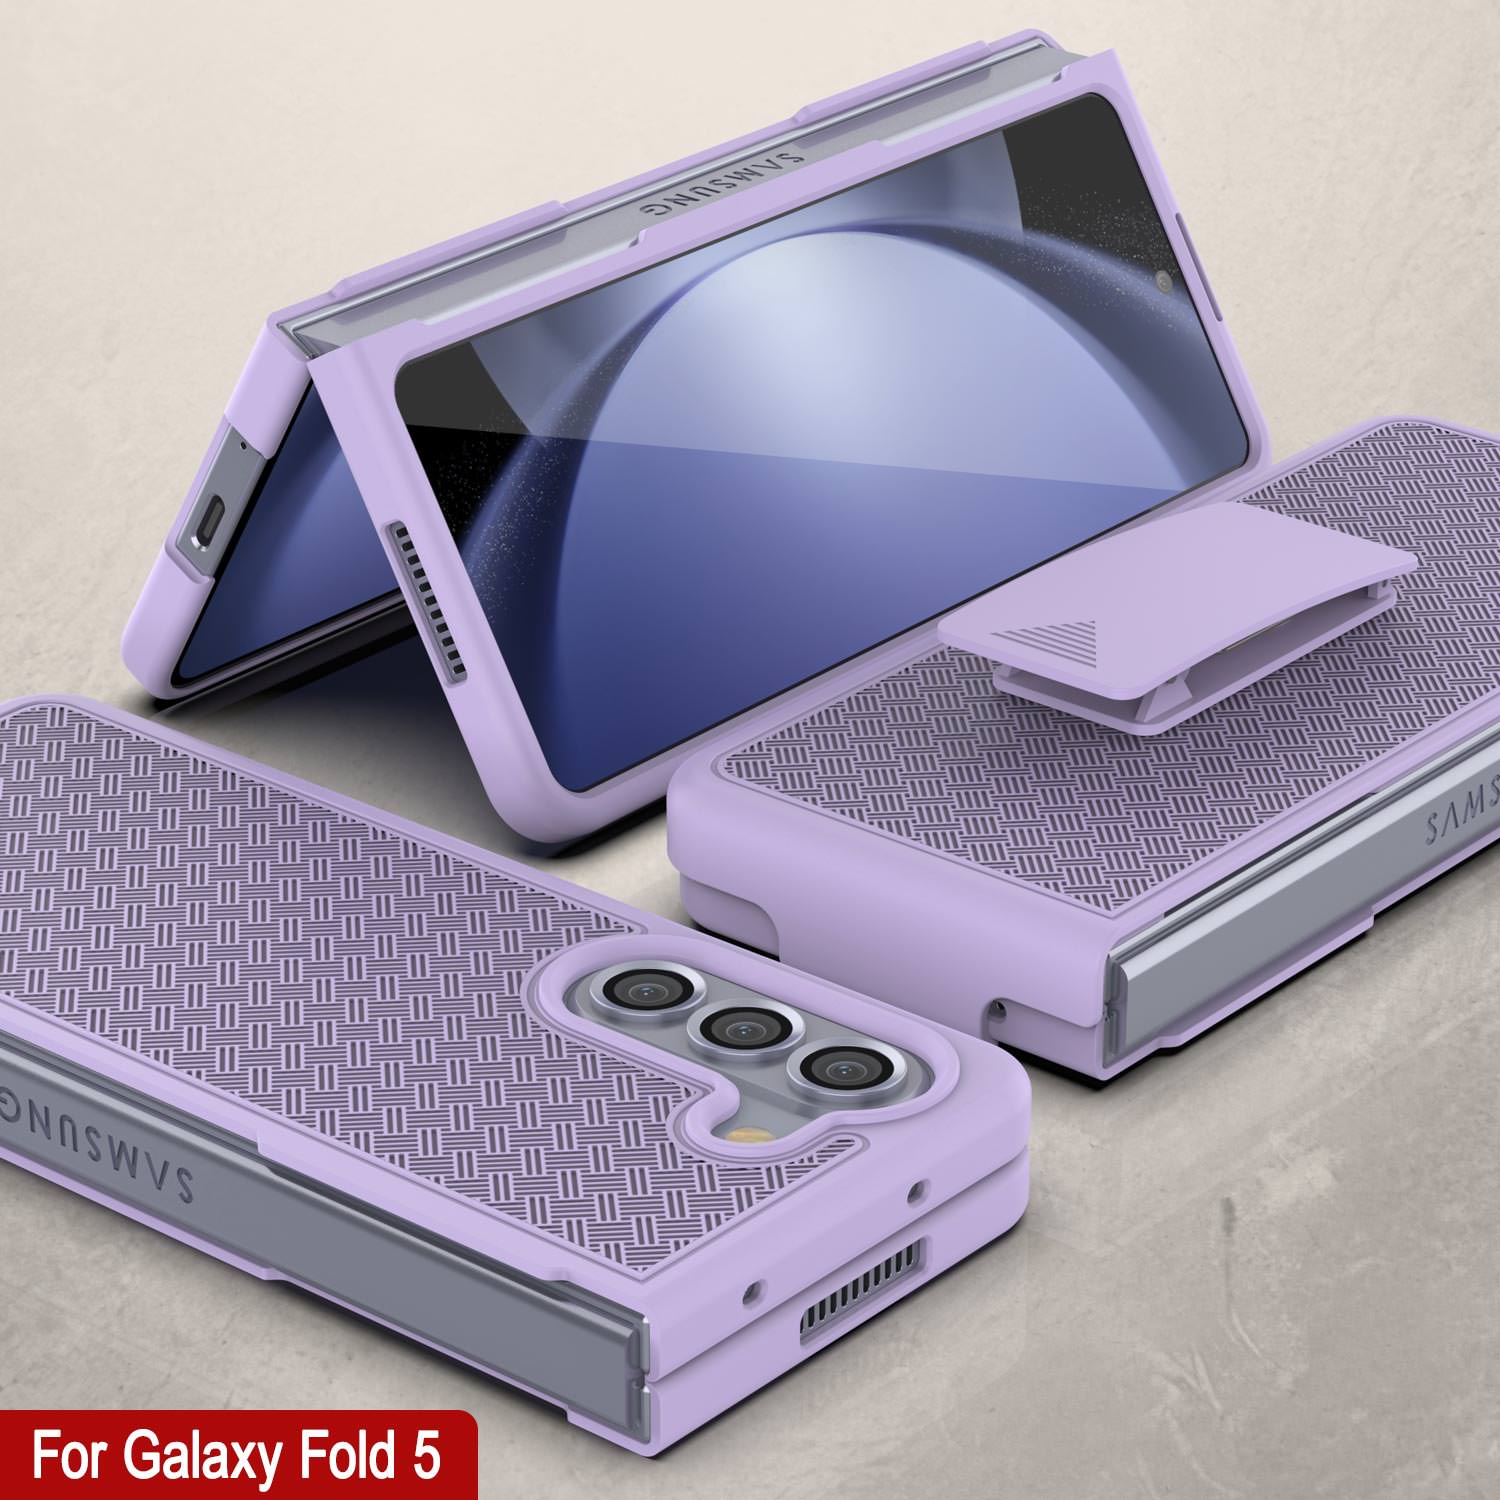 Galaxy Z Fold5 Case With Tempered Glass Screen Protector, Holster Belt Clip & Built-In Kickstand [Lilac]